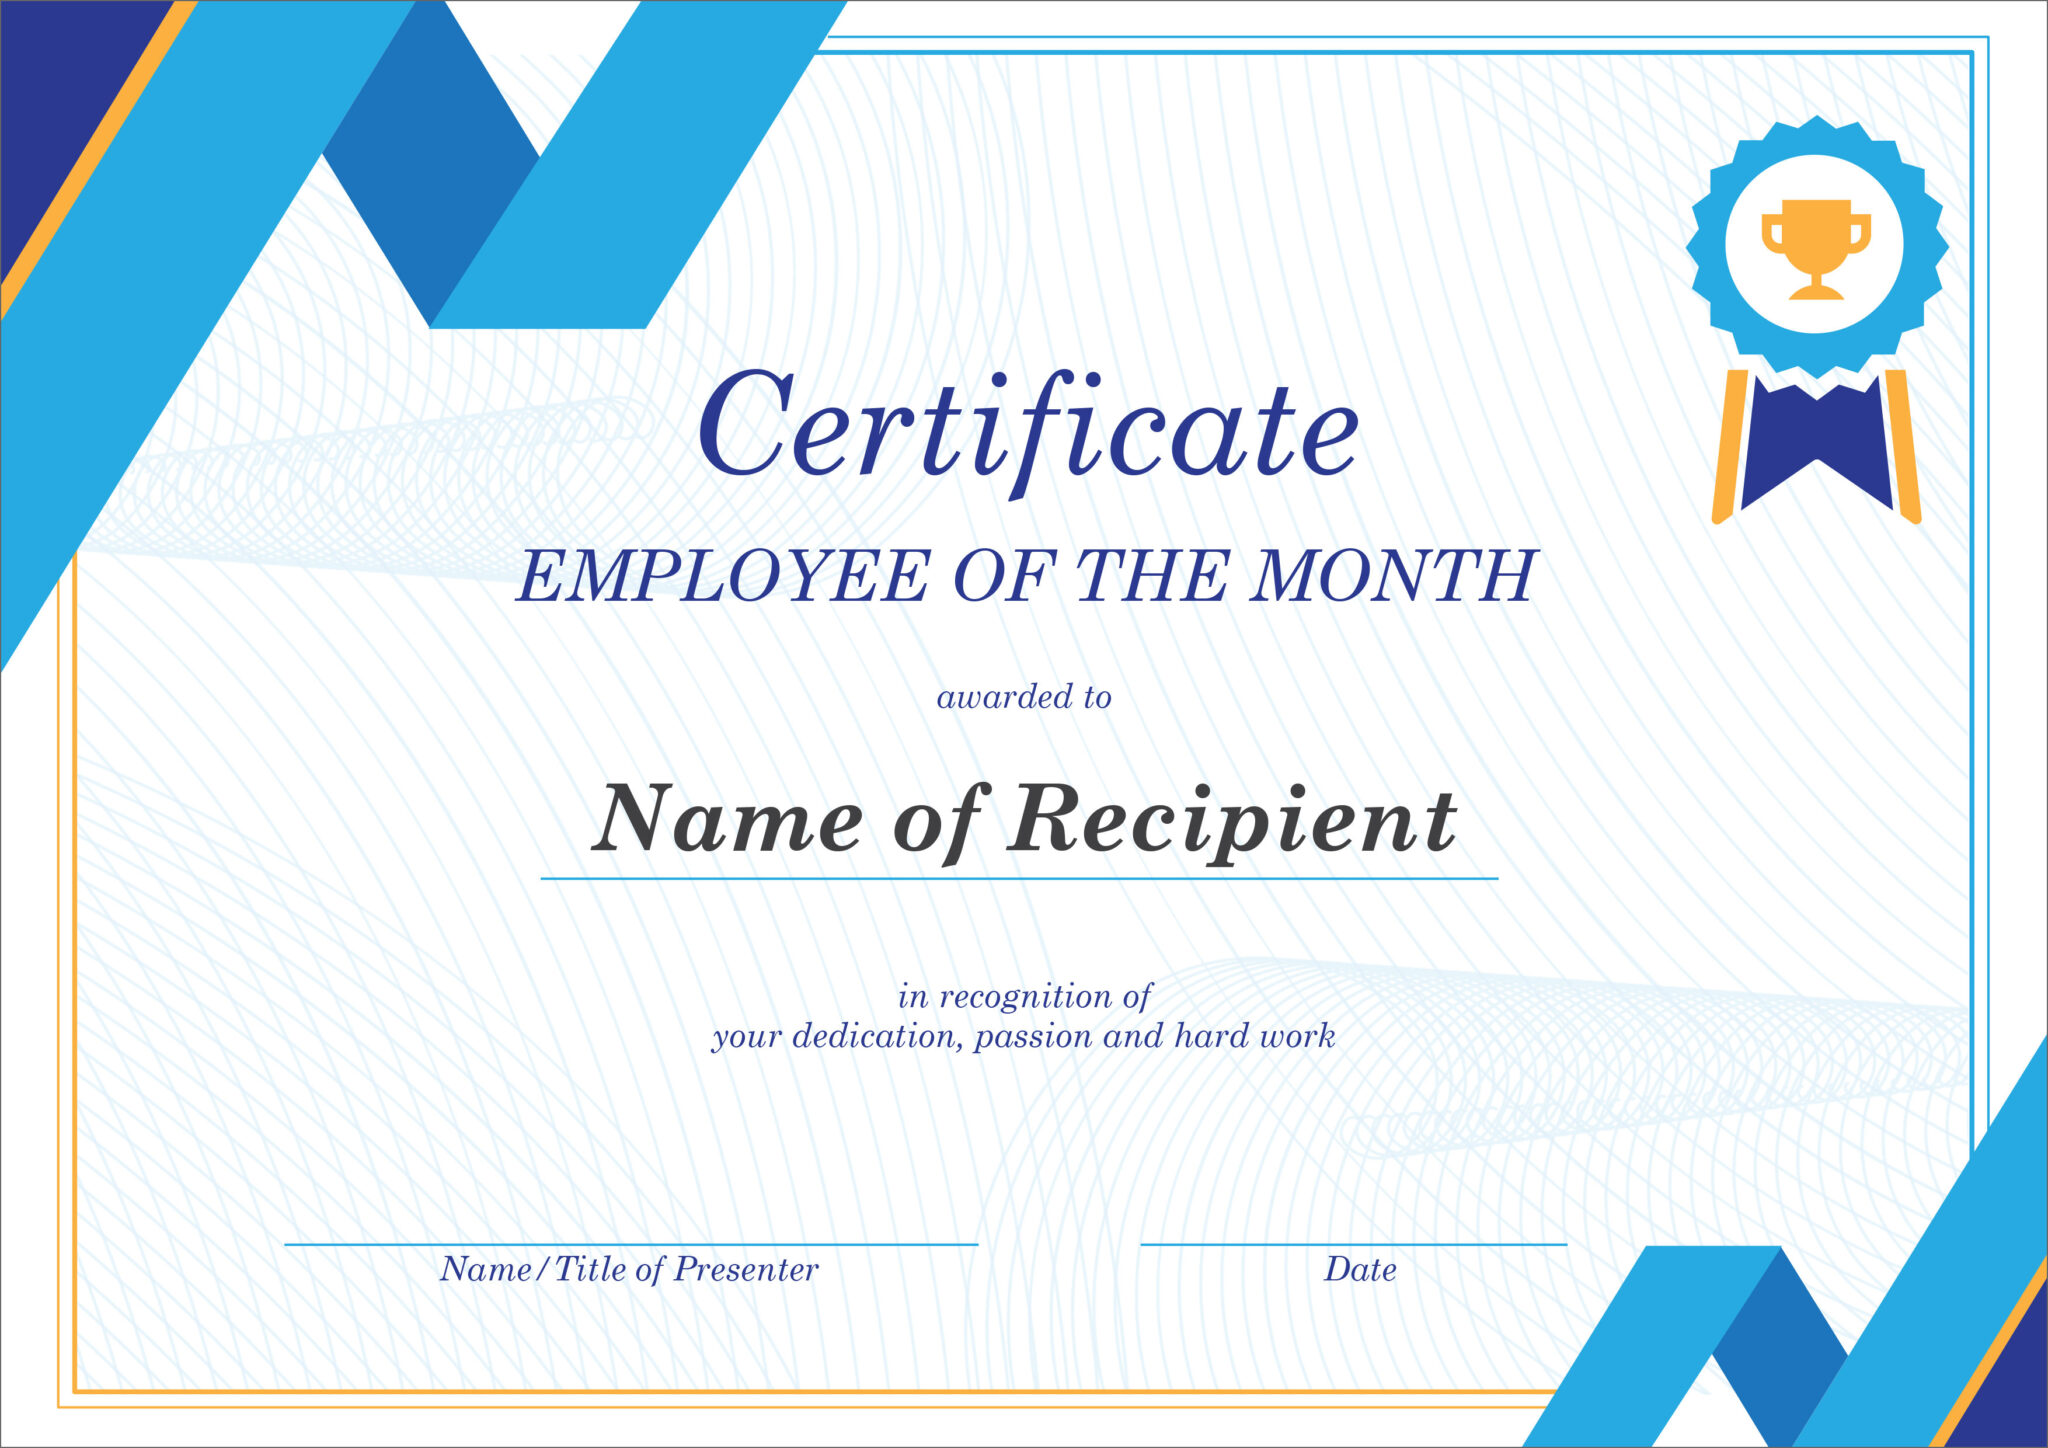 50 Free Creative Blank Certificate Templates In Psd For Employee